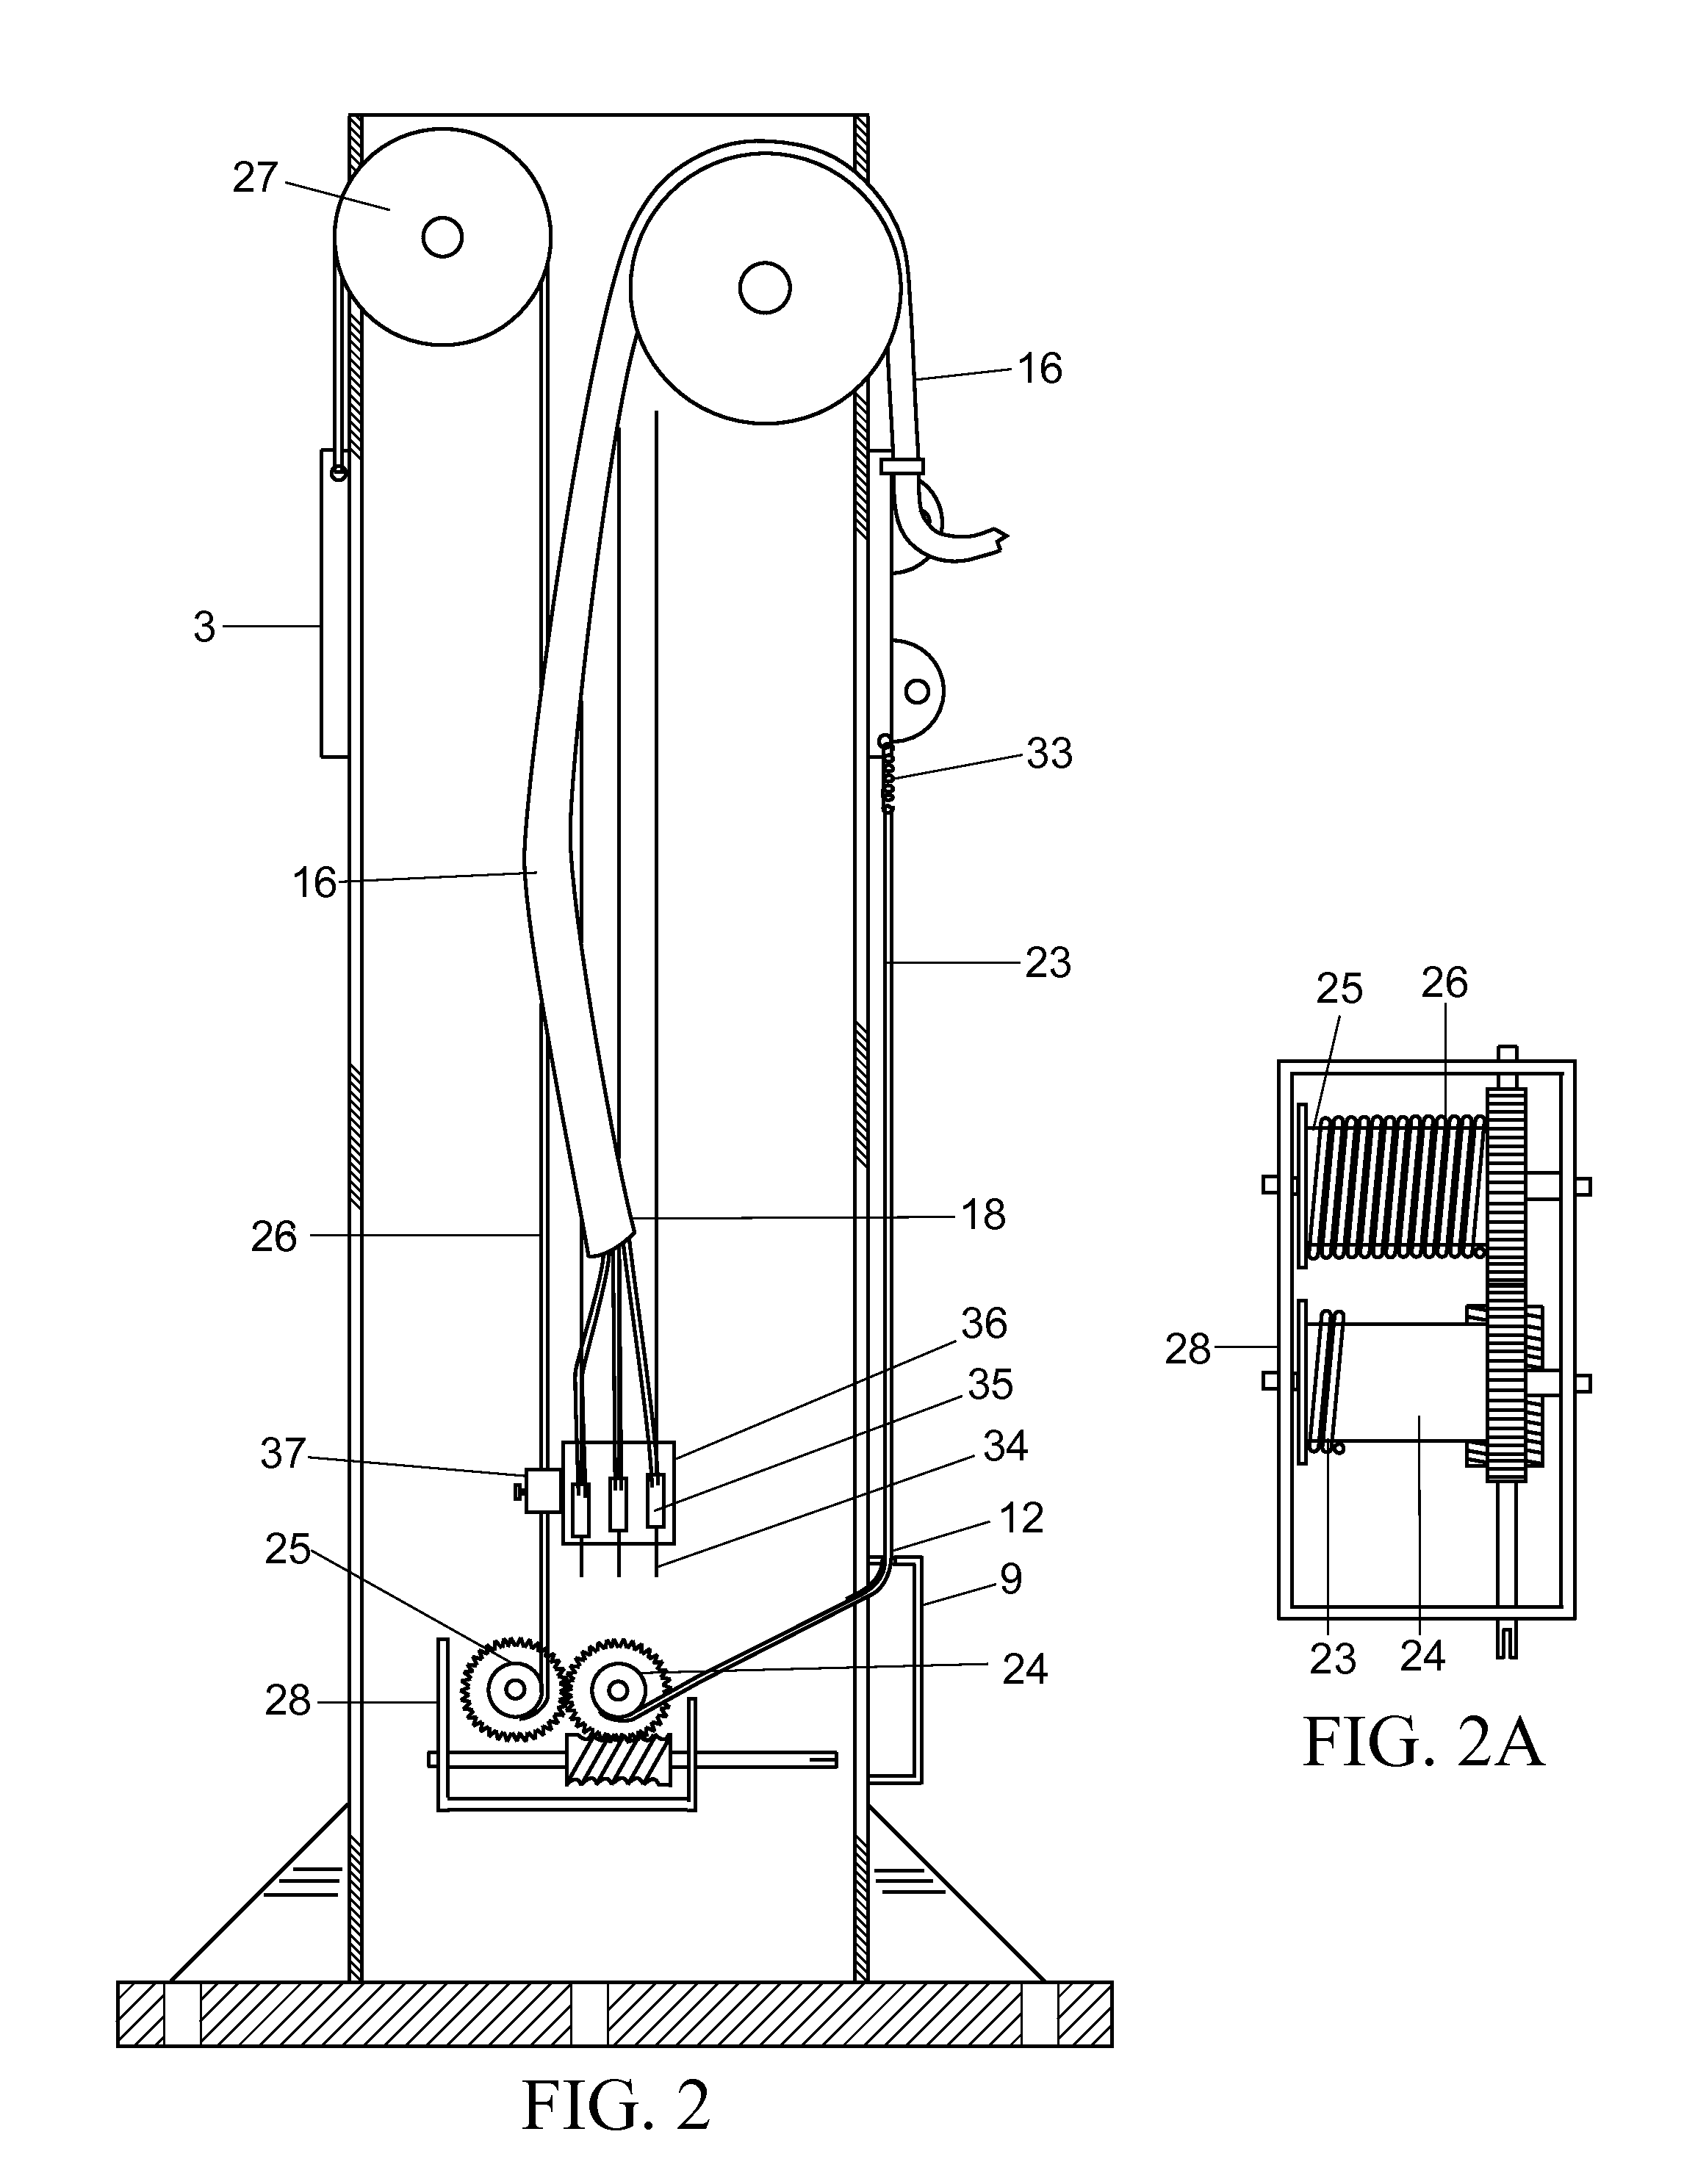 Method of improving the functionality of pole mounted electrical producing or consuming panels